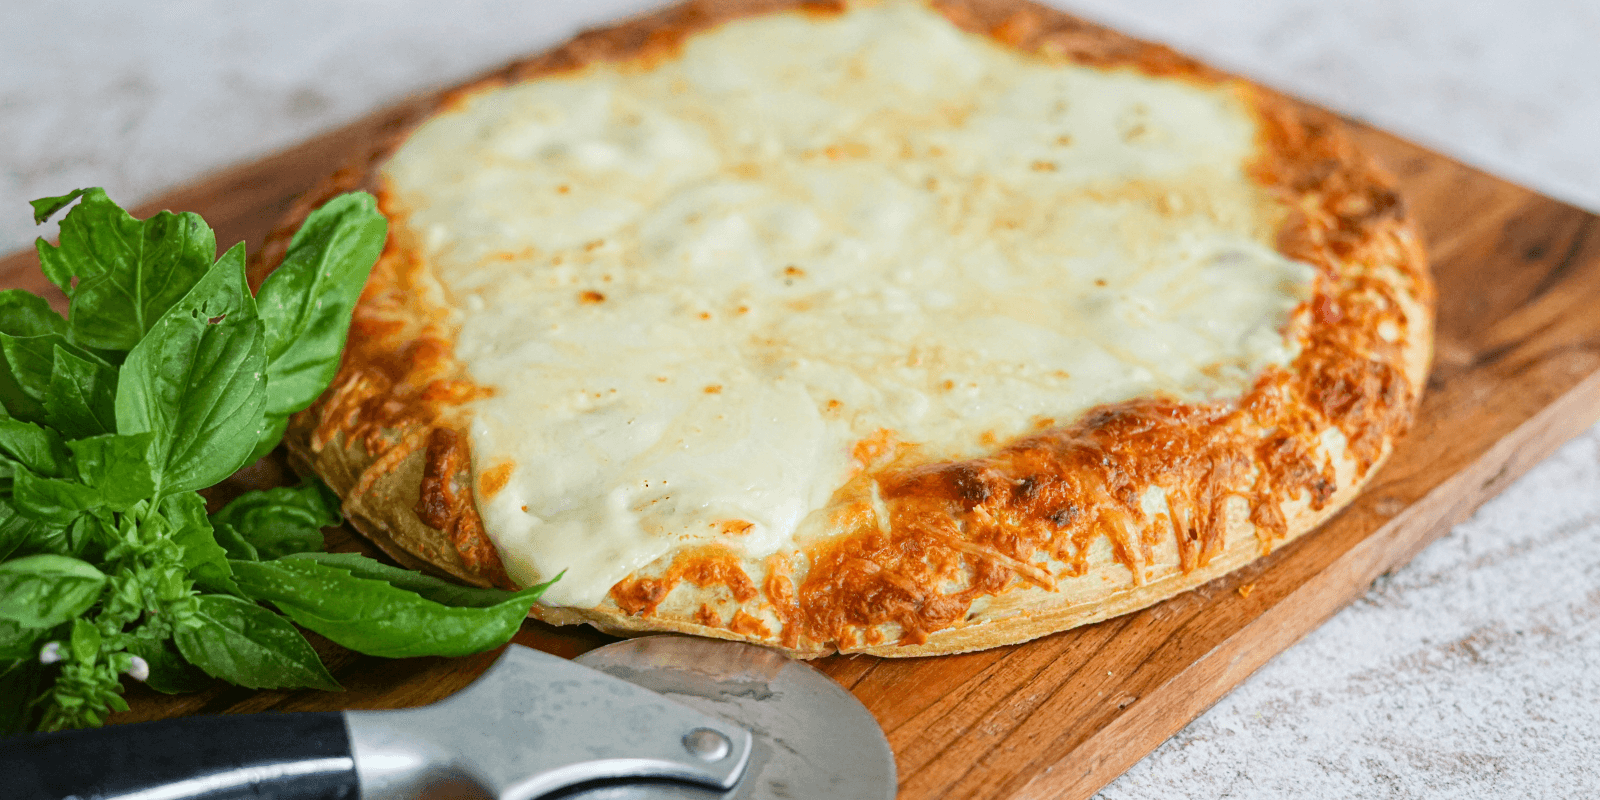 More Cheese Frozen Pizza